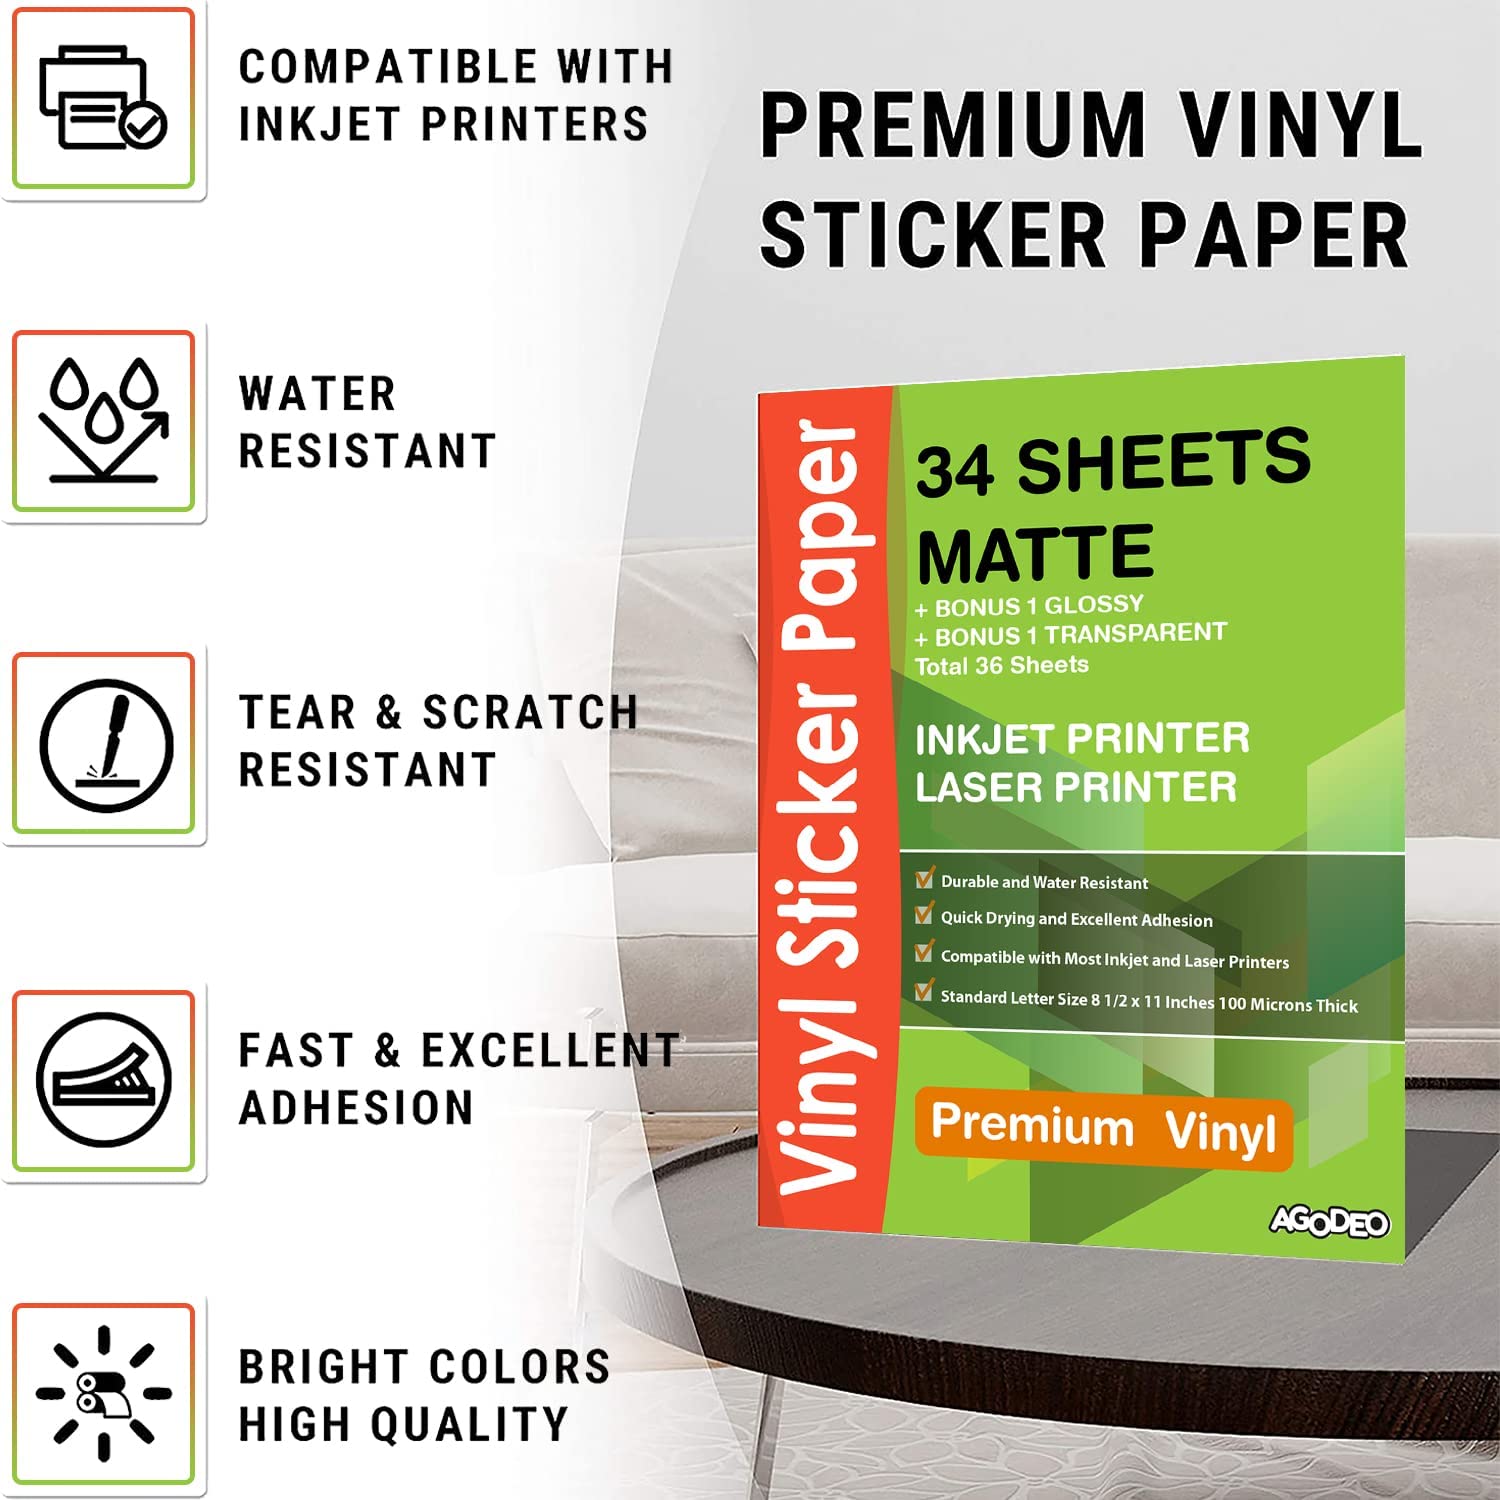 JOYEZA Premium Printable Vinyl Sticker Paper for Inkjet Printer - 25 Sheets Matte White Waterproof, Dries Quickly Vivid Colors, Holds Ink Well- Tear